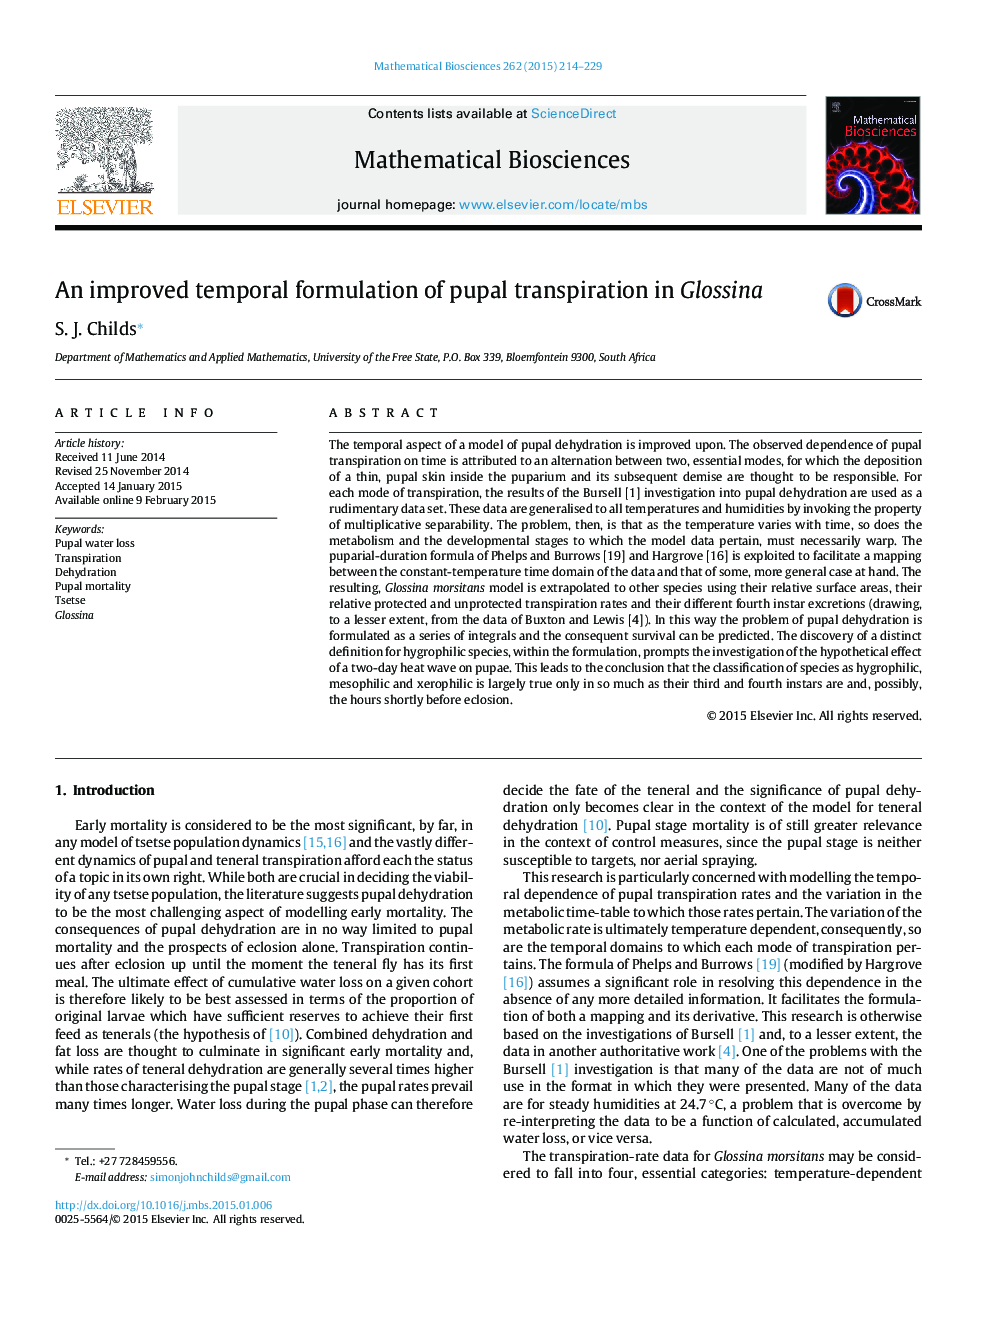 An improved temporal formulation of pupal transpiration in Glossina